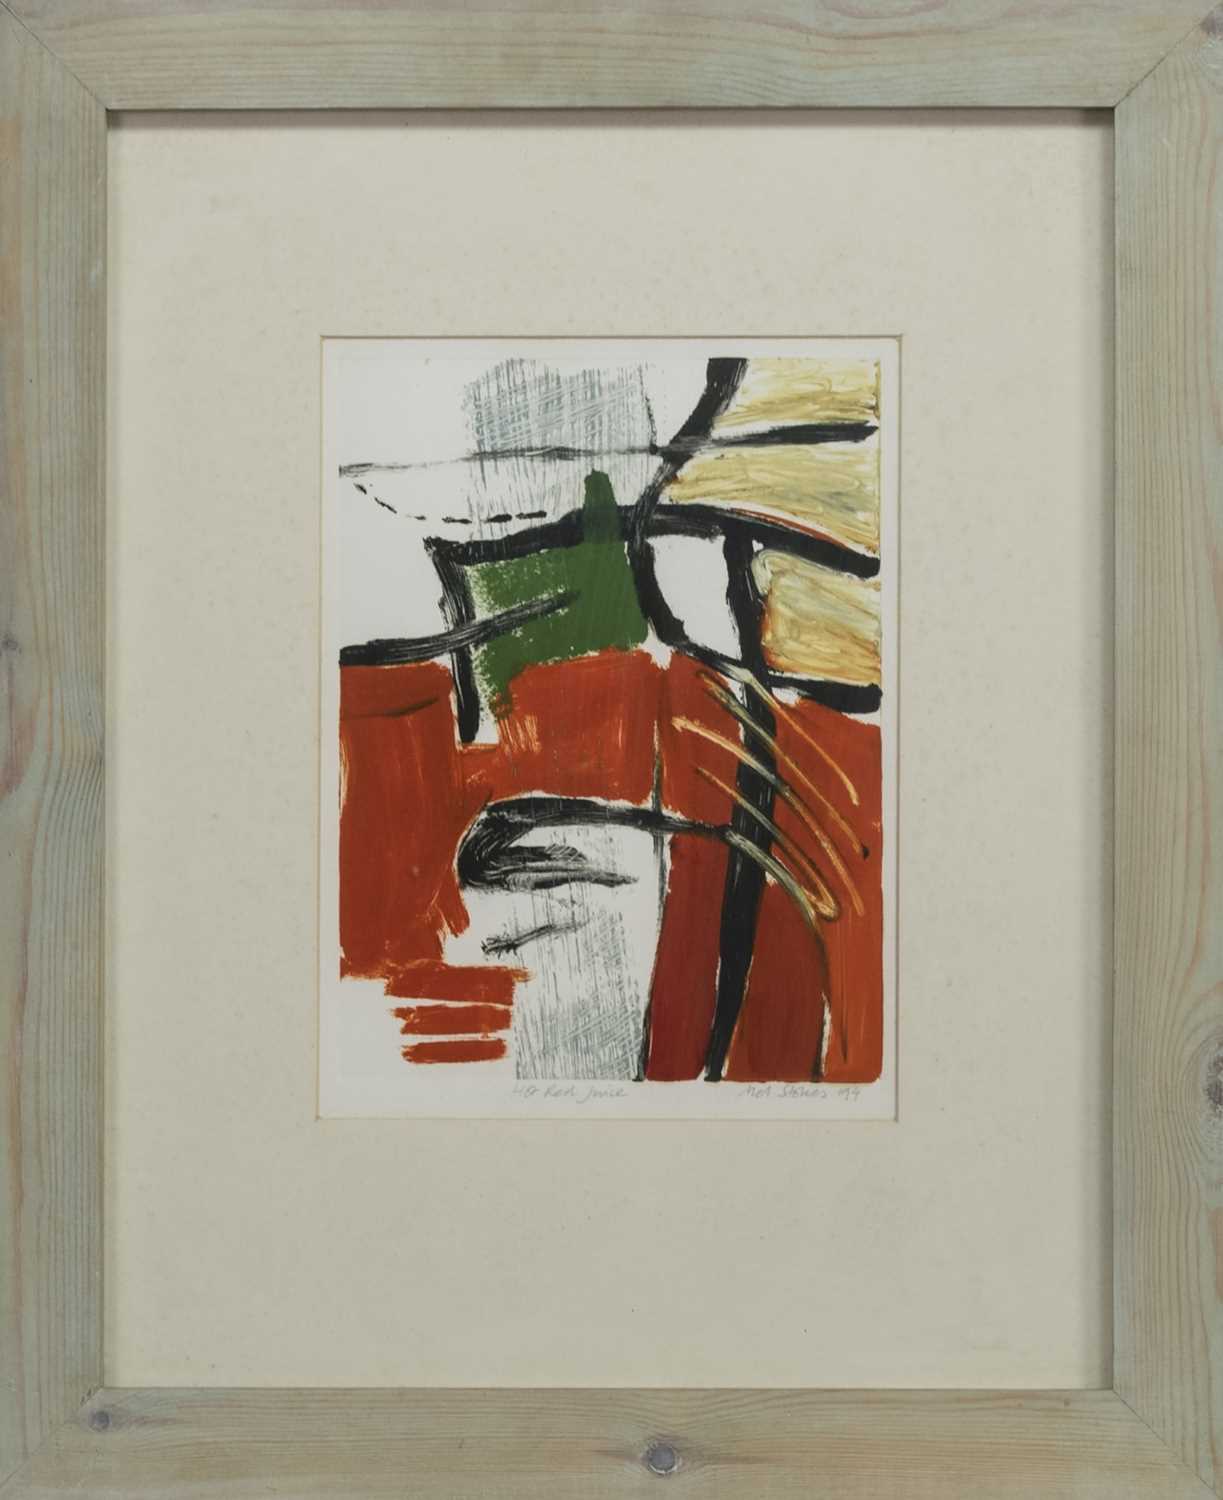 RED HOT JUICE, A MONOTYPE BY MELANIE STOKES